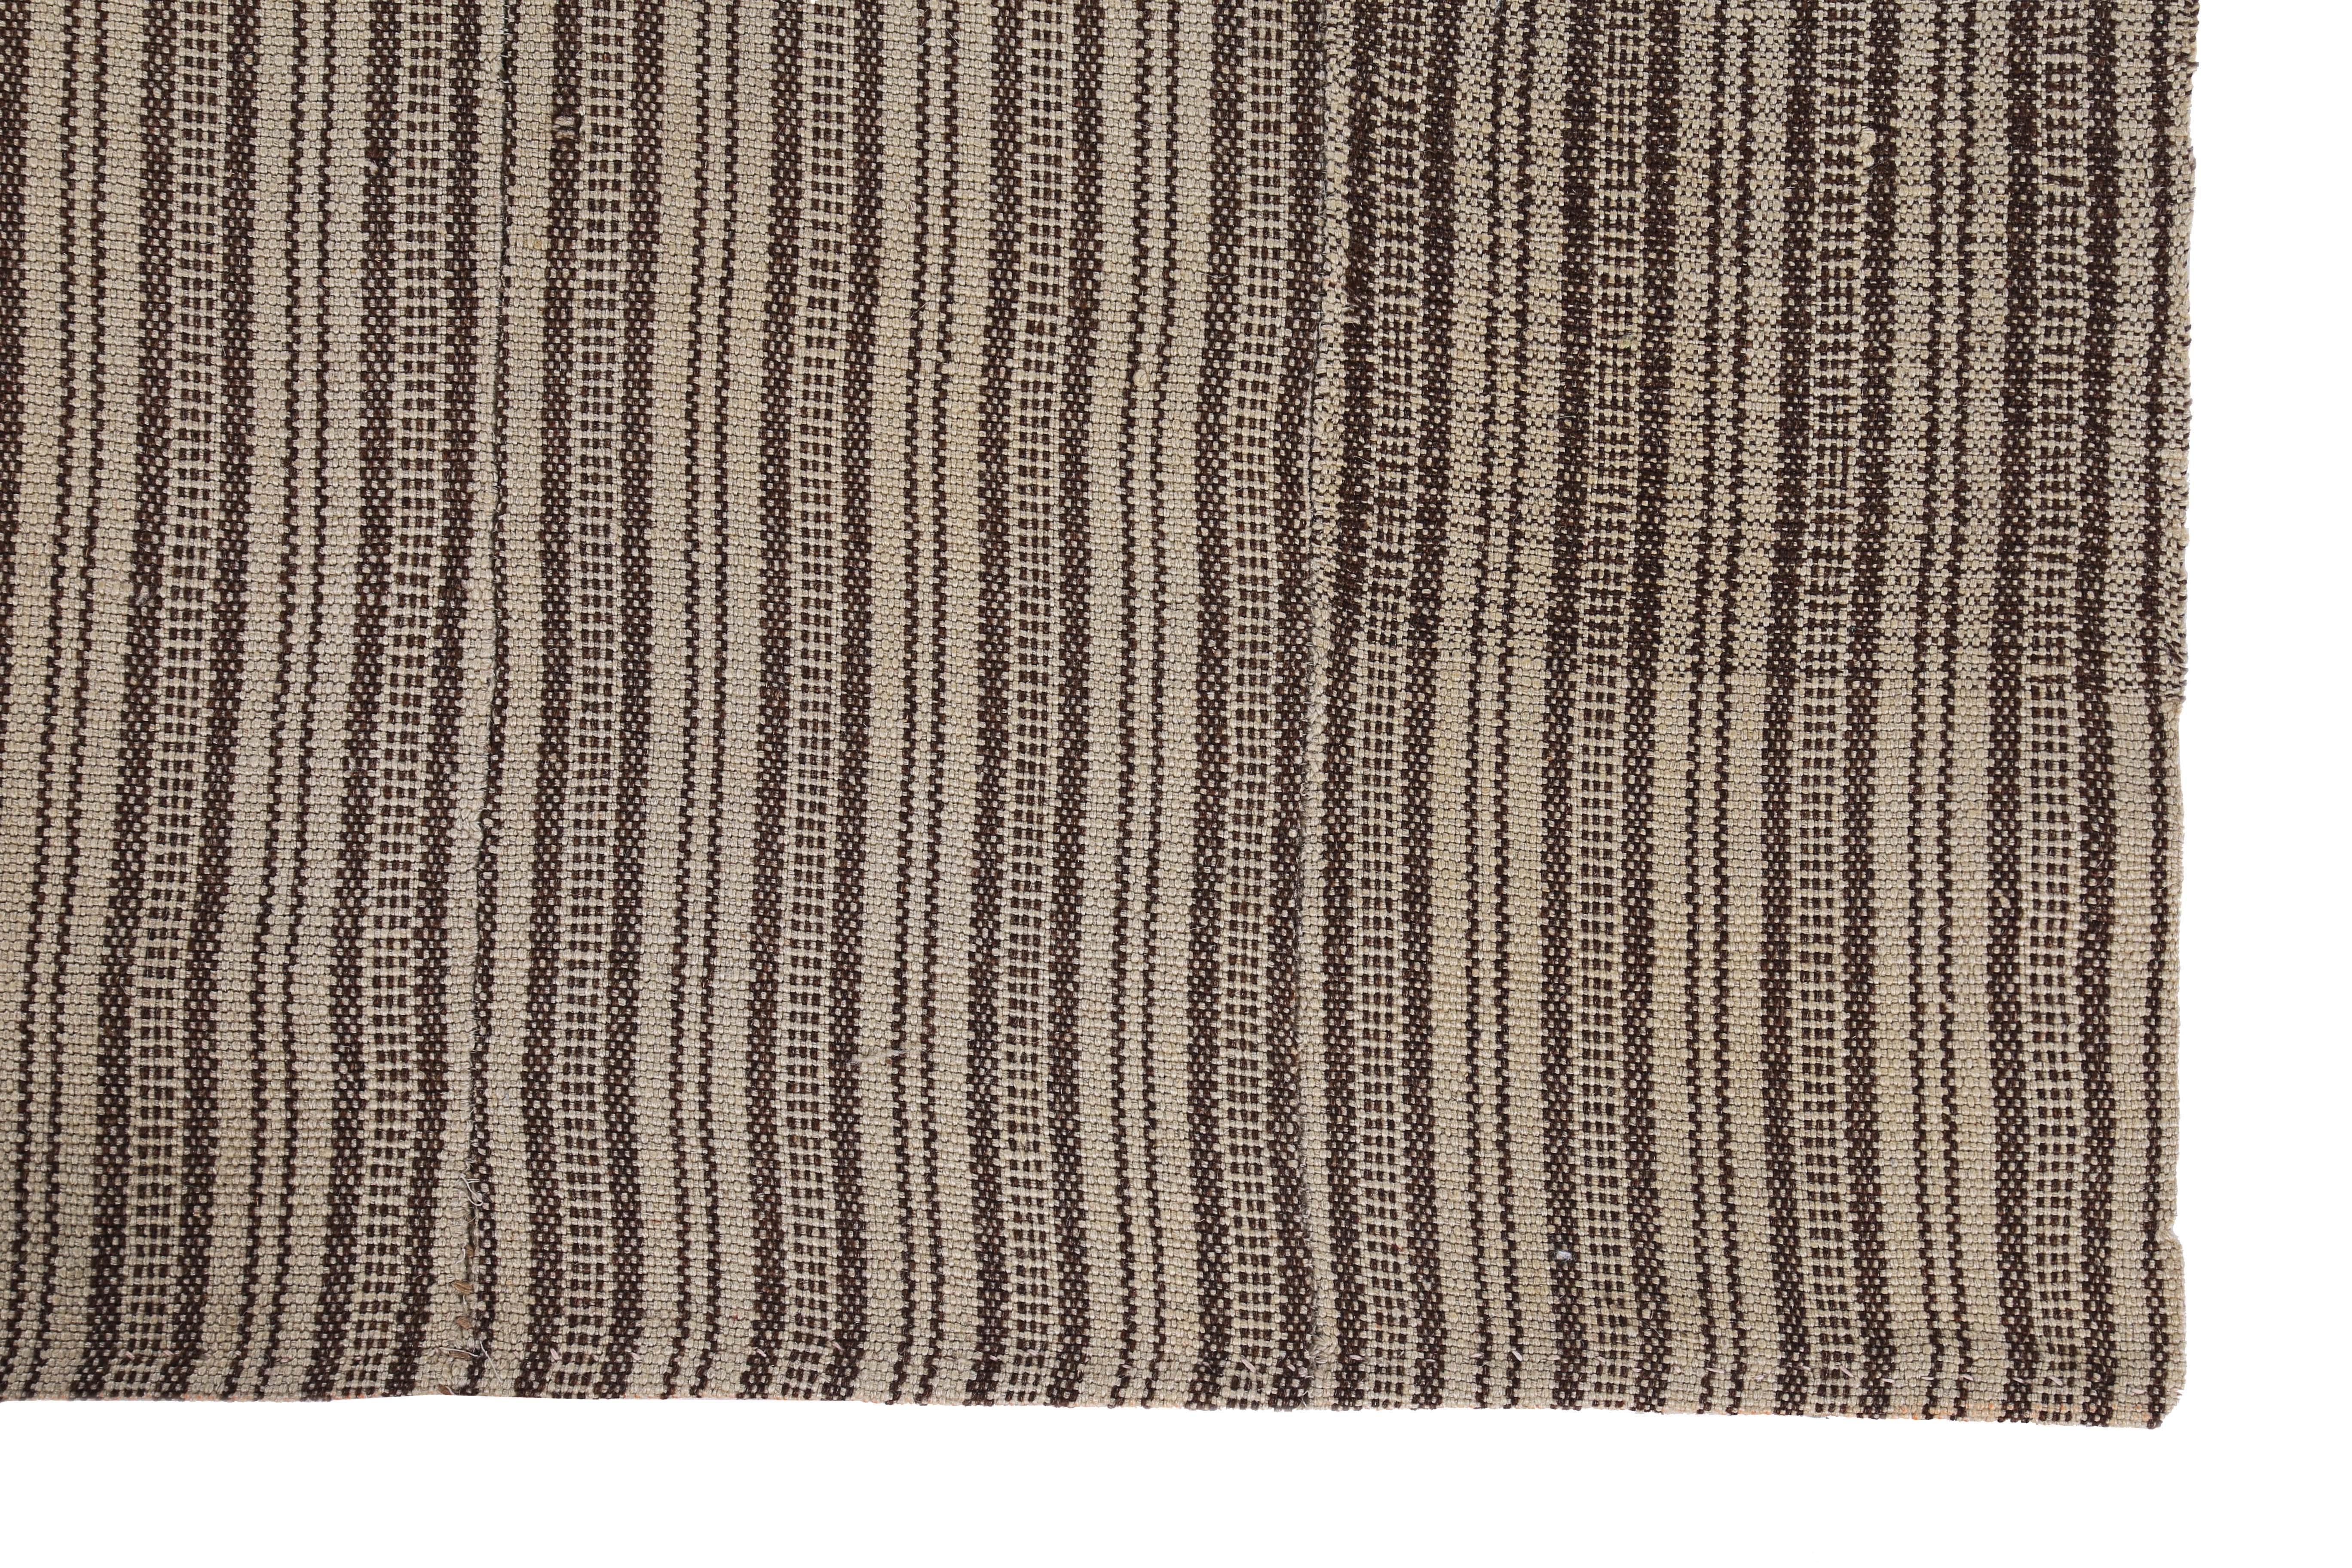 Hand-Woven Modern Turkish Kilim Rug with Beige and Brown Pencil Stripes For Sale